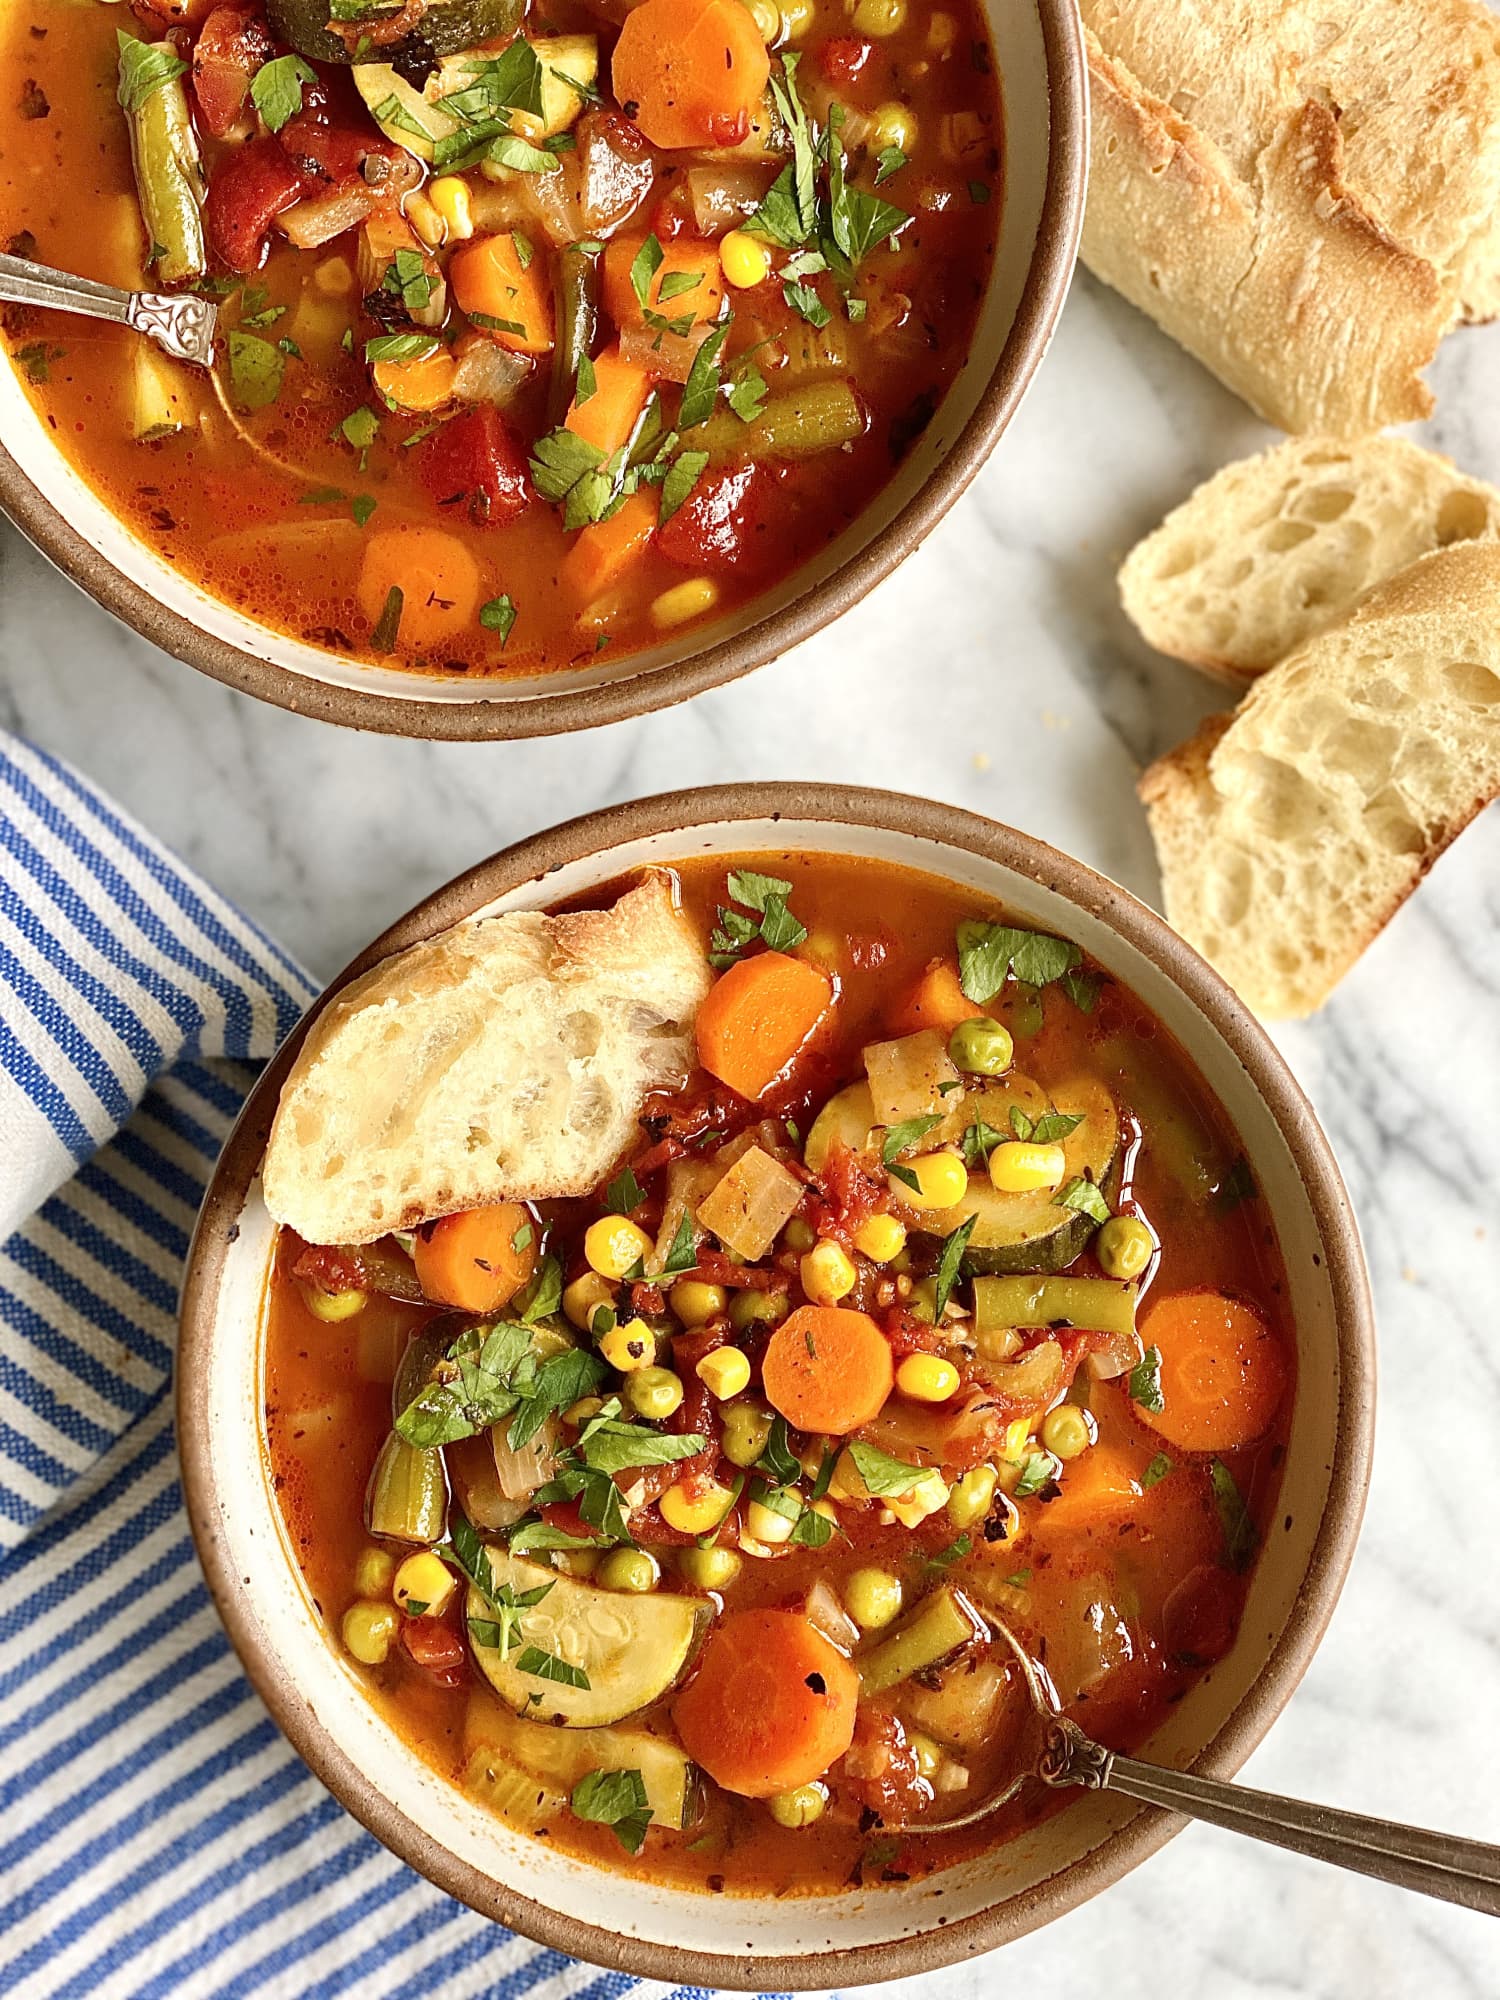 Loaded Vegetable Soup Is the Perfect Summer-to-Fall Transition Meal